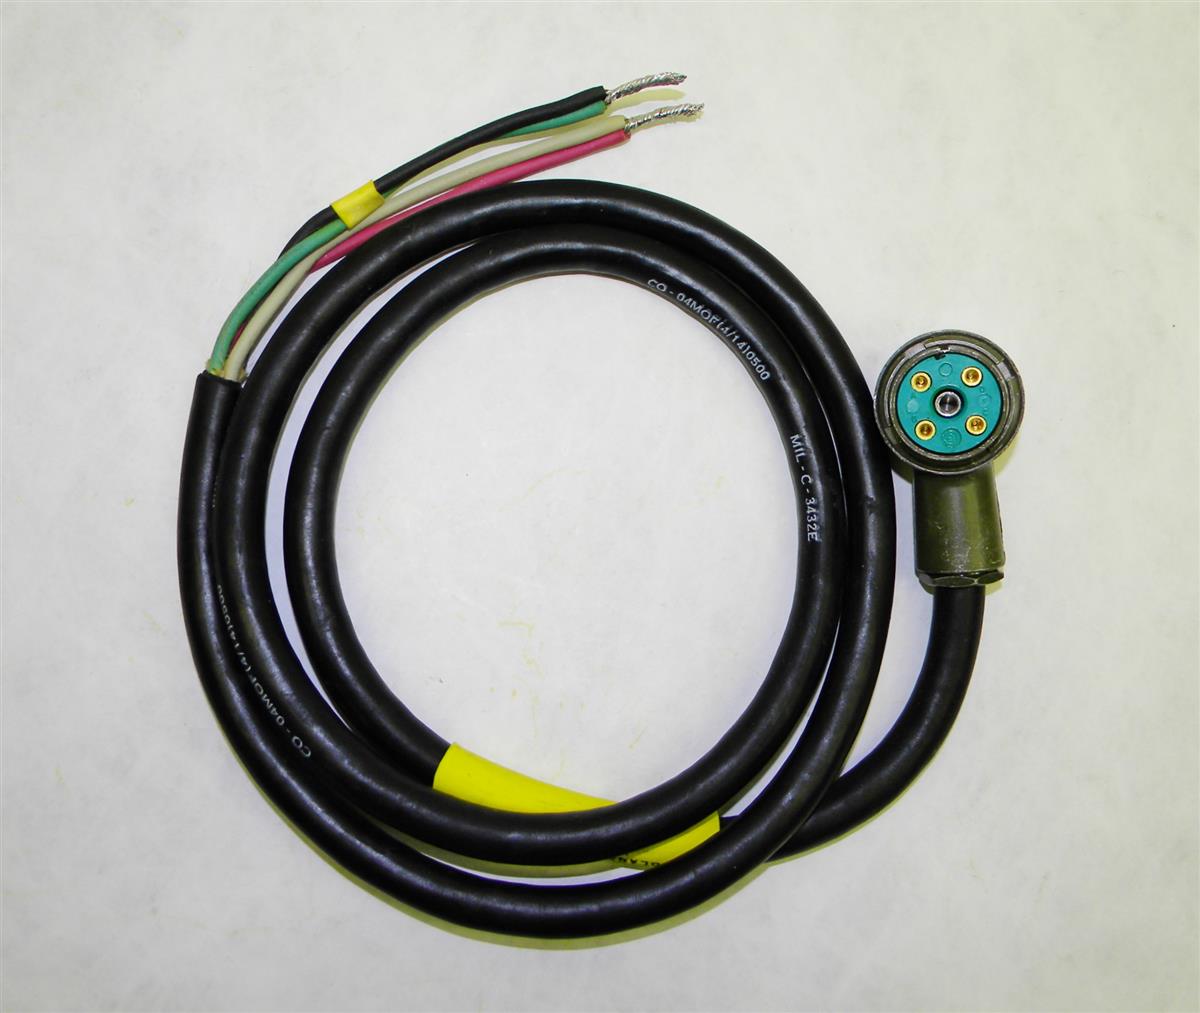 RAD-231 | 5995-00-823-2828  SM-D-415550, Power Electrical Cable Assembly RAD-231AA.JPG